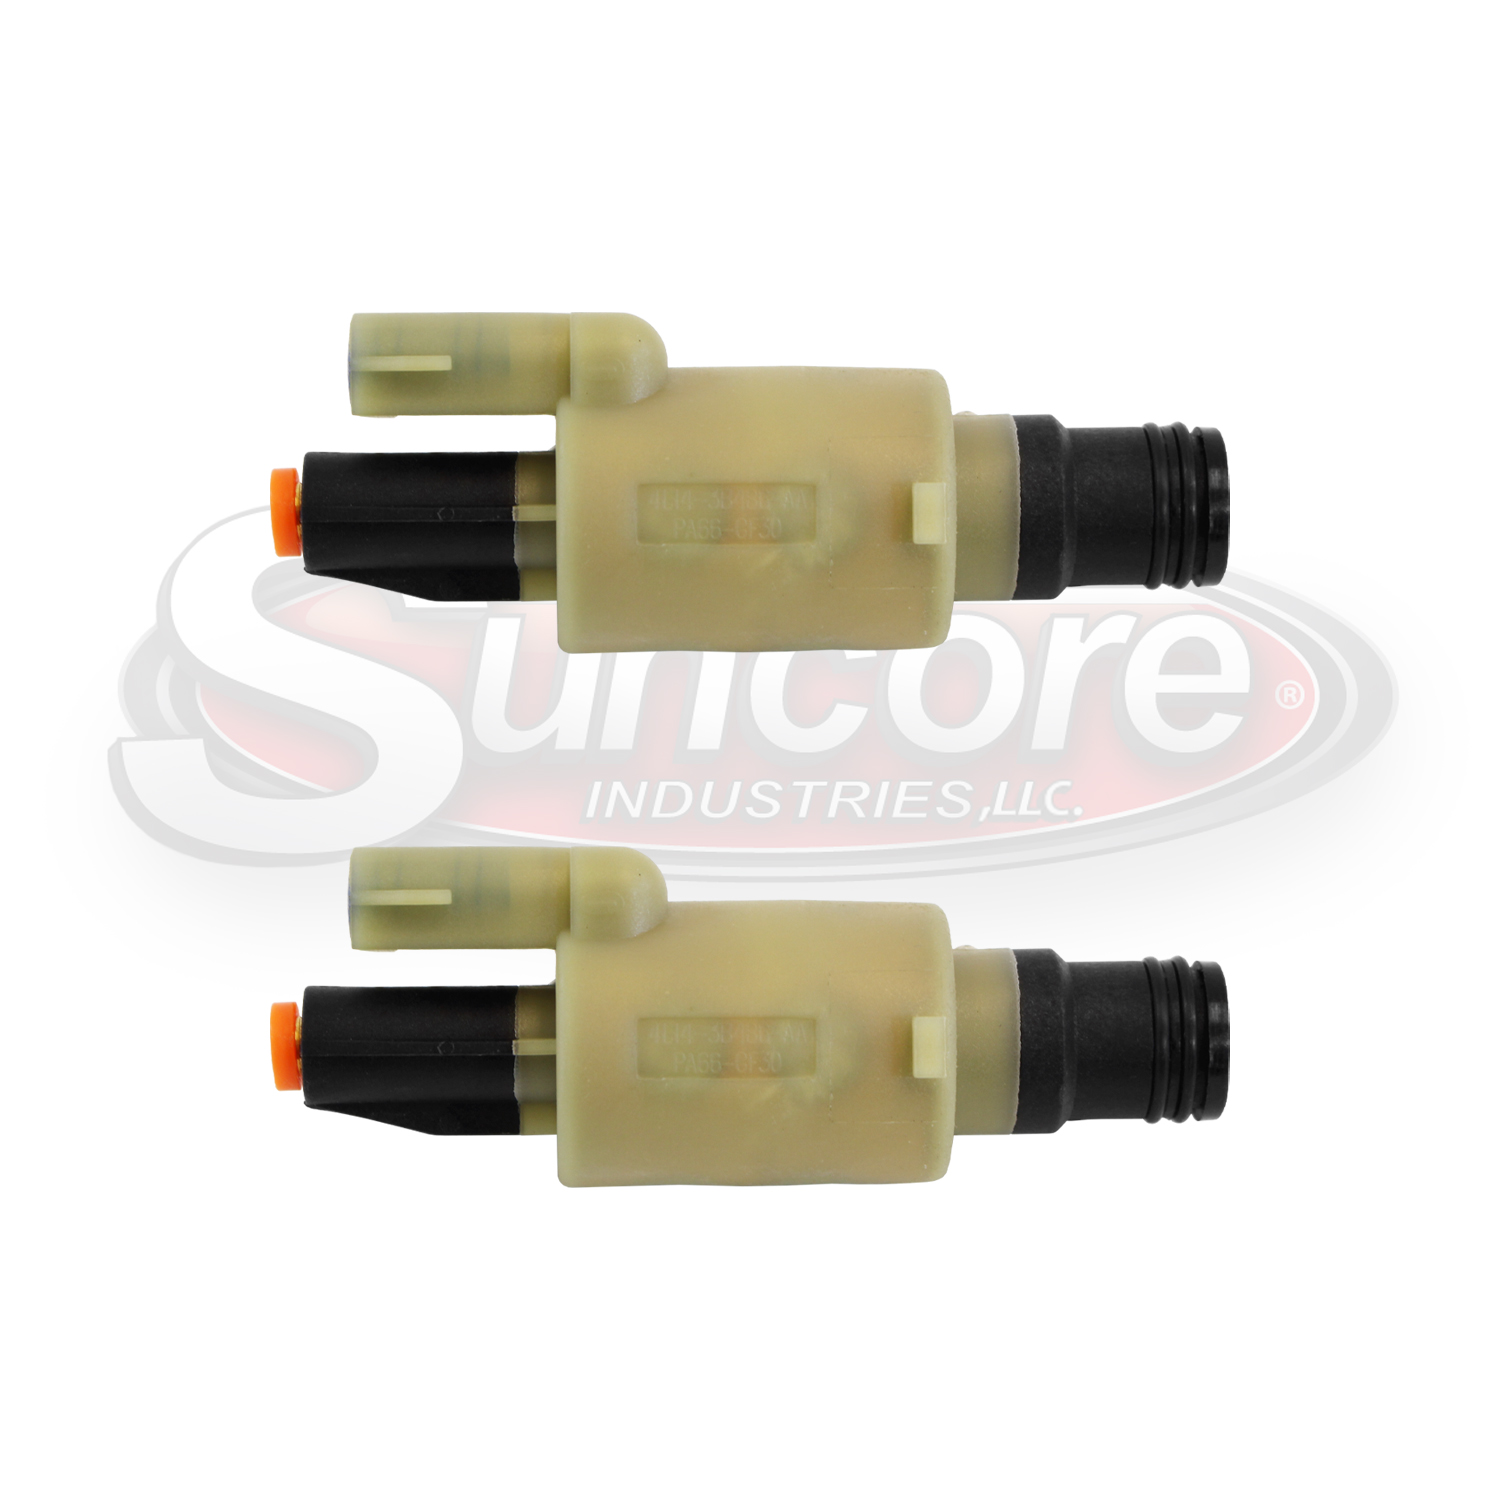 Rear Pair of Solenoid Valves for Suspension Air Springs for Ford, Lincoln & Mercury